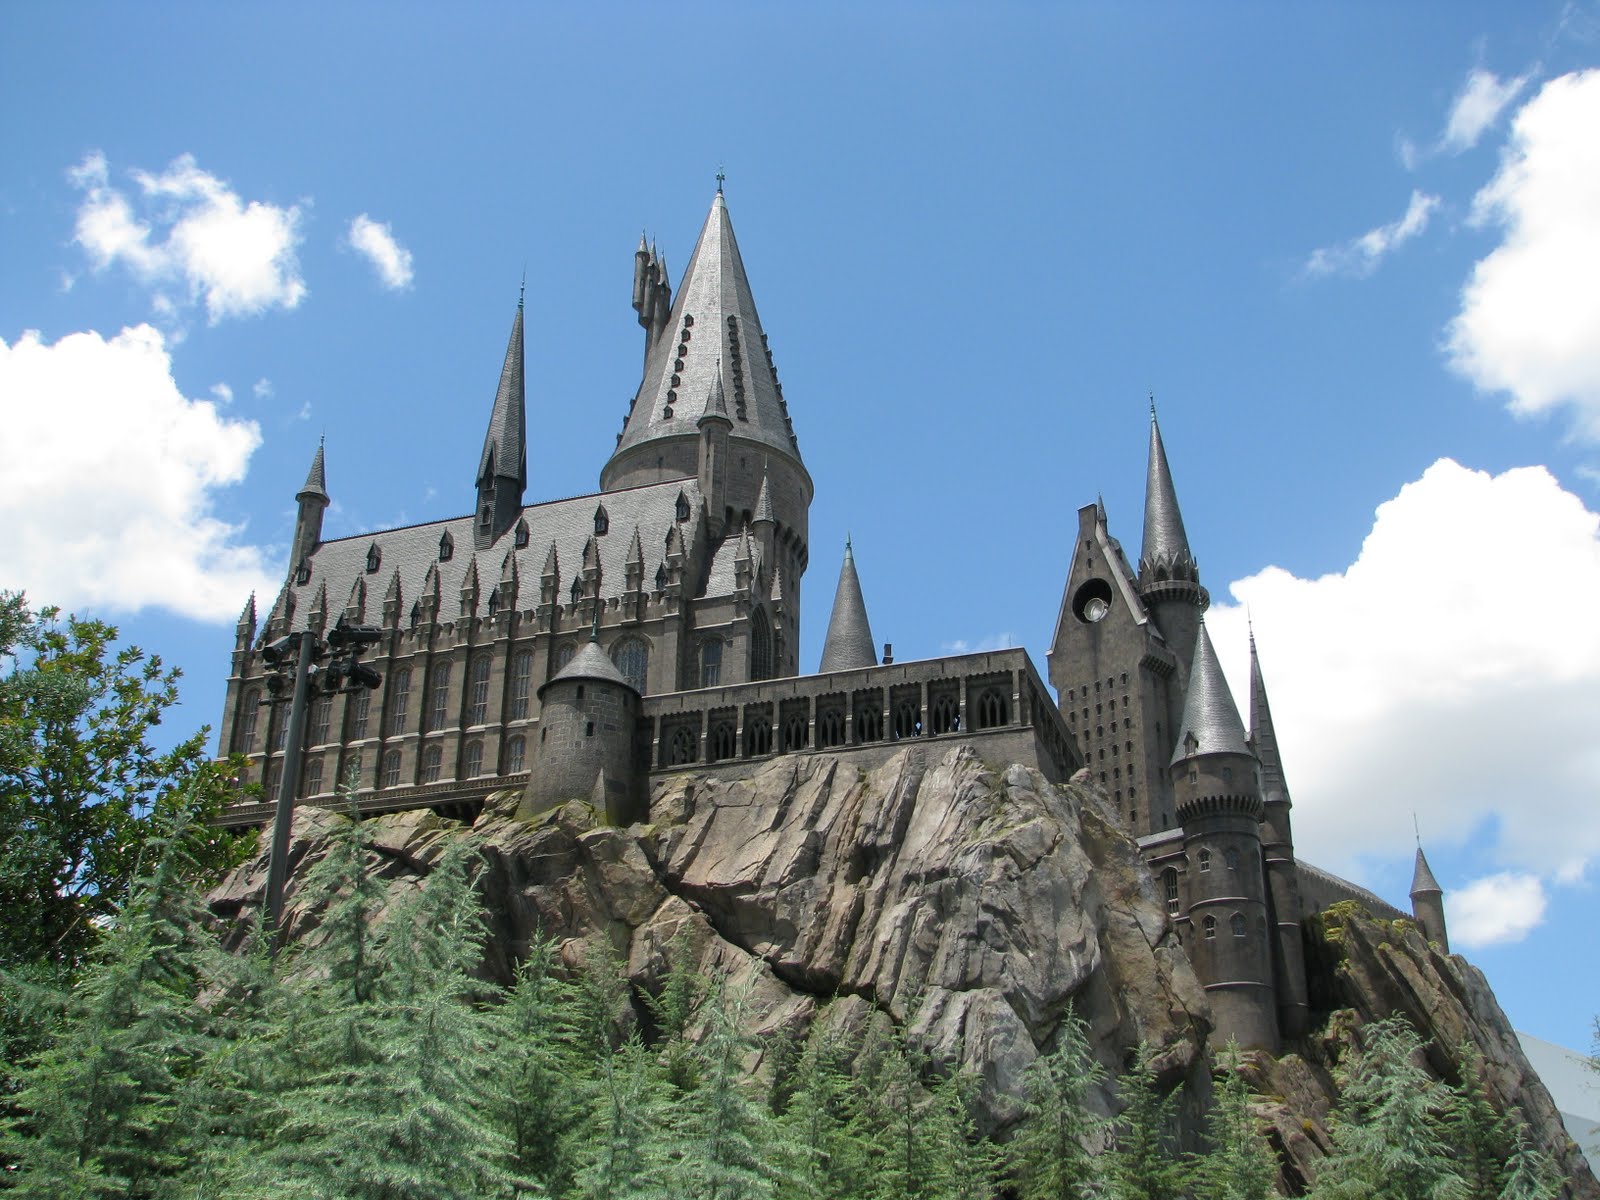  Adventure is the best place you can go to live your dream of Hogwarts